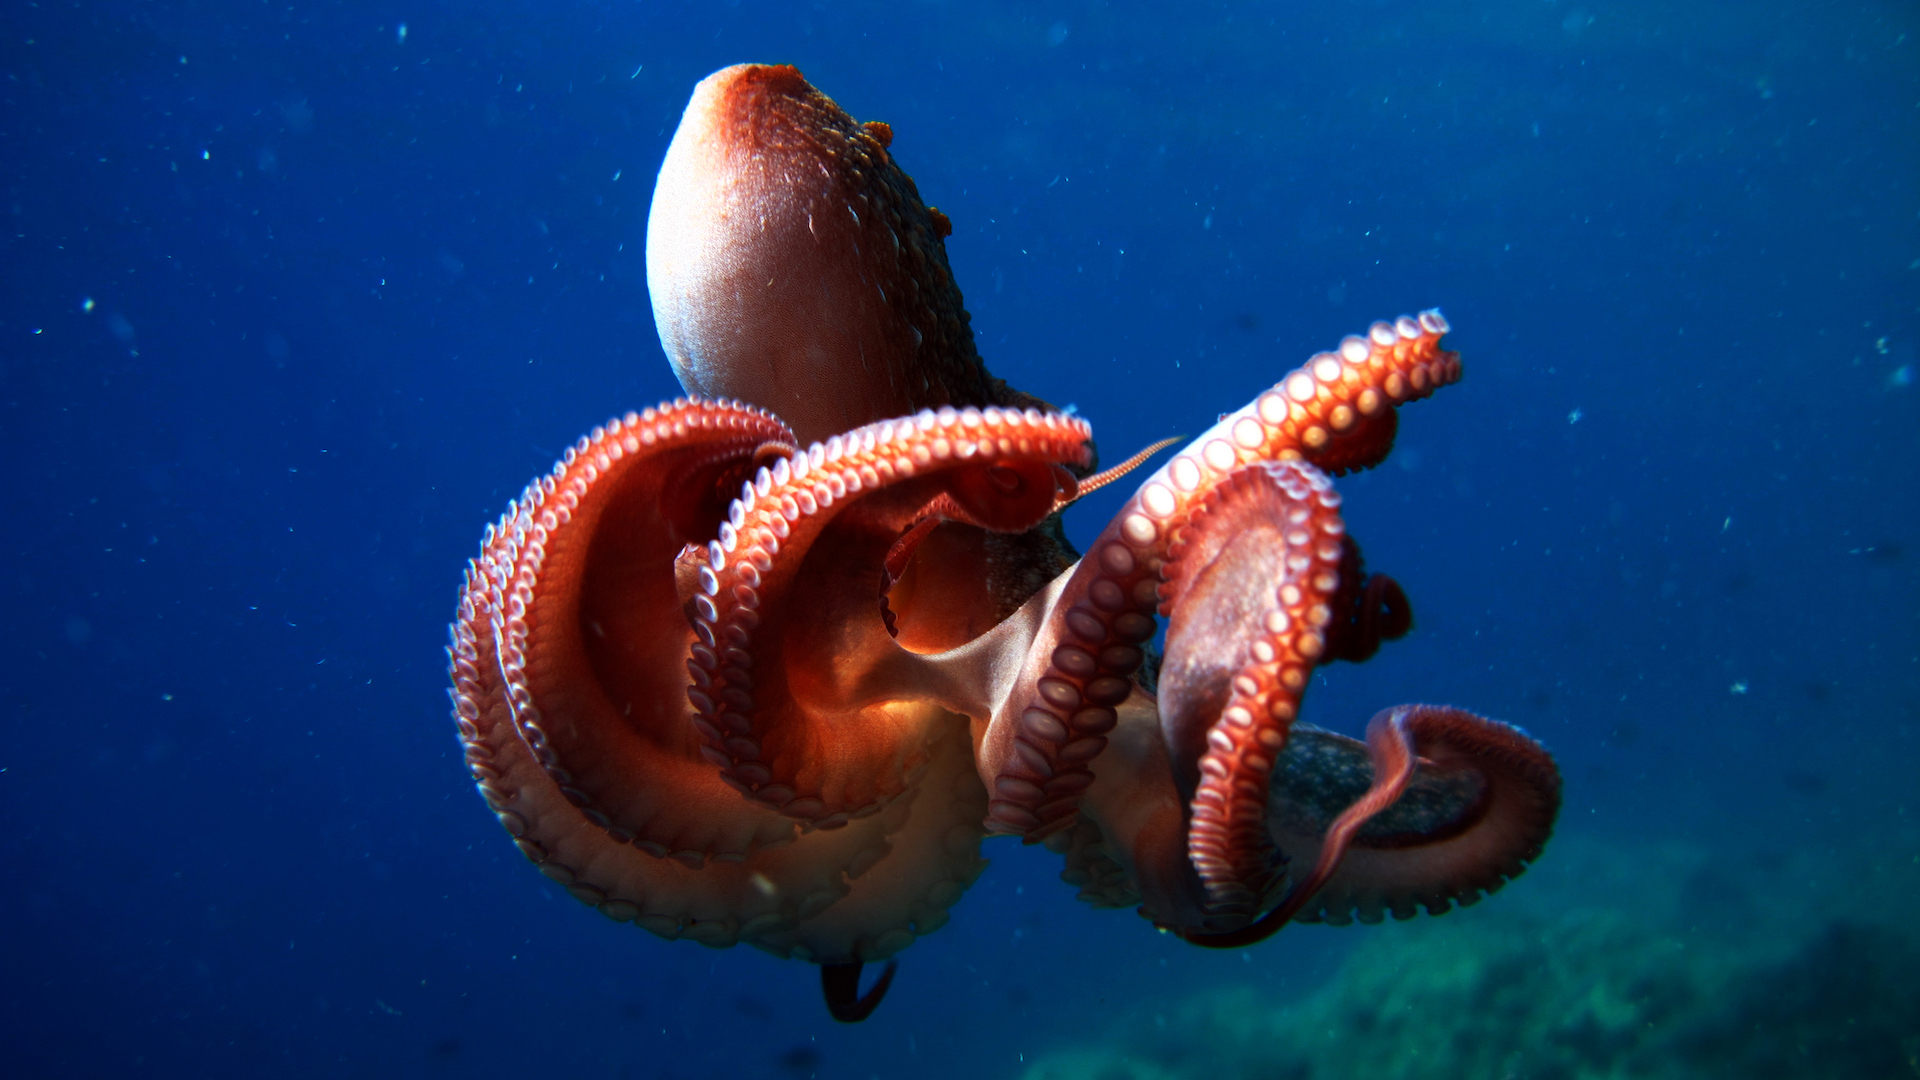 A photograph of an octopus in the ocean